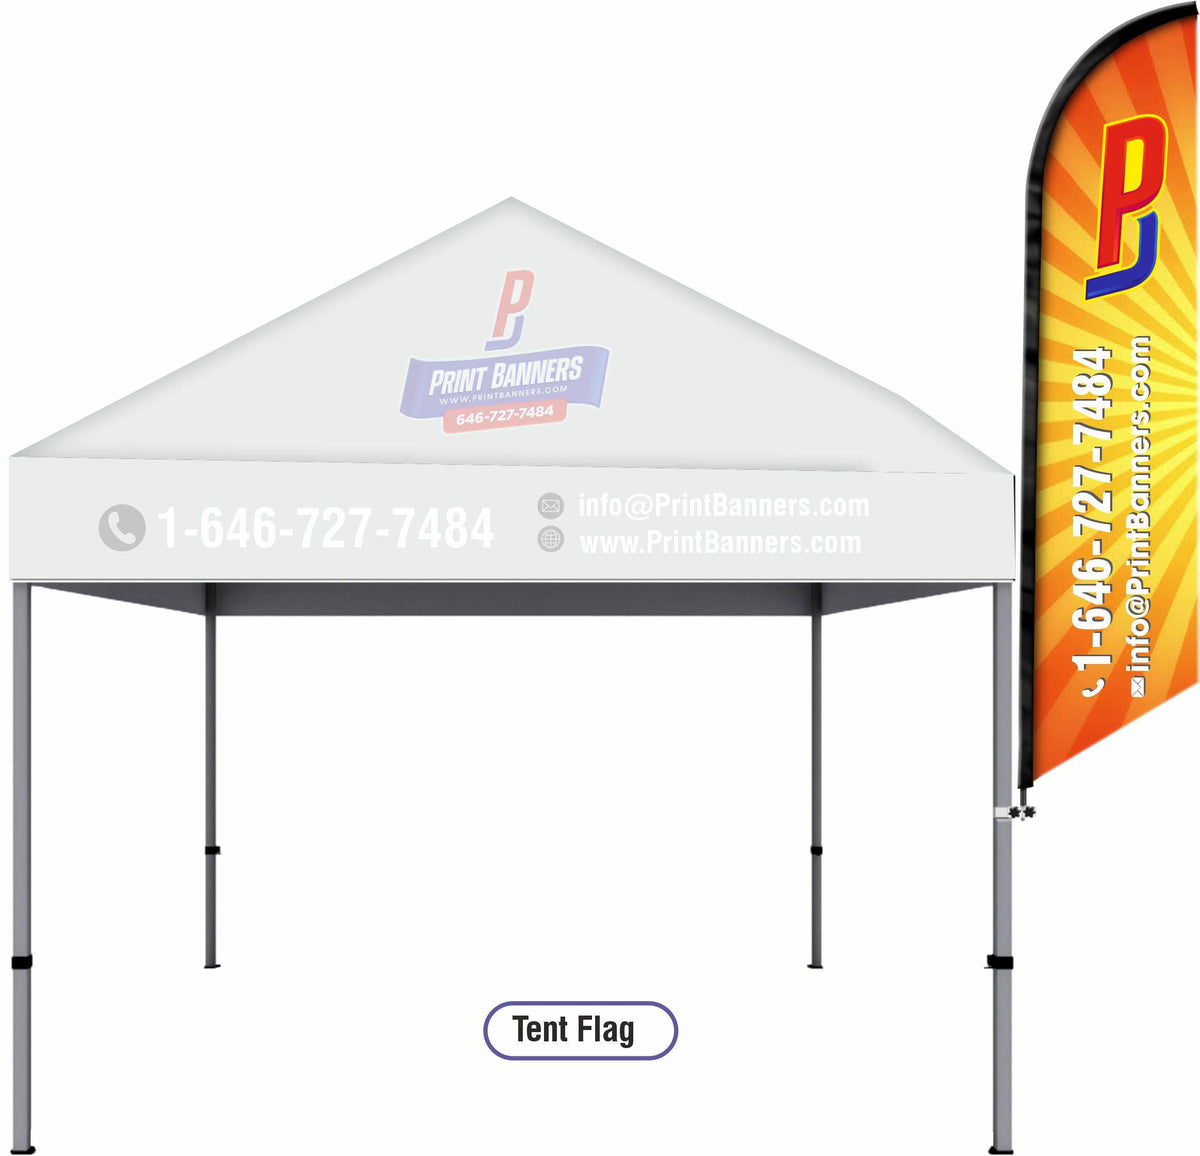 Tent Flag - Print Banners NYC